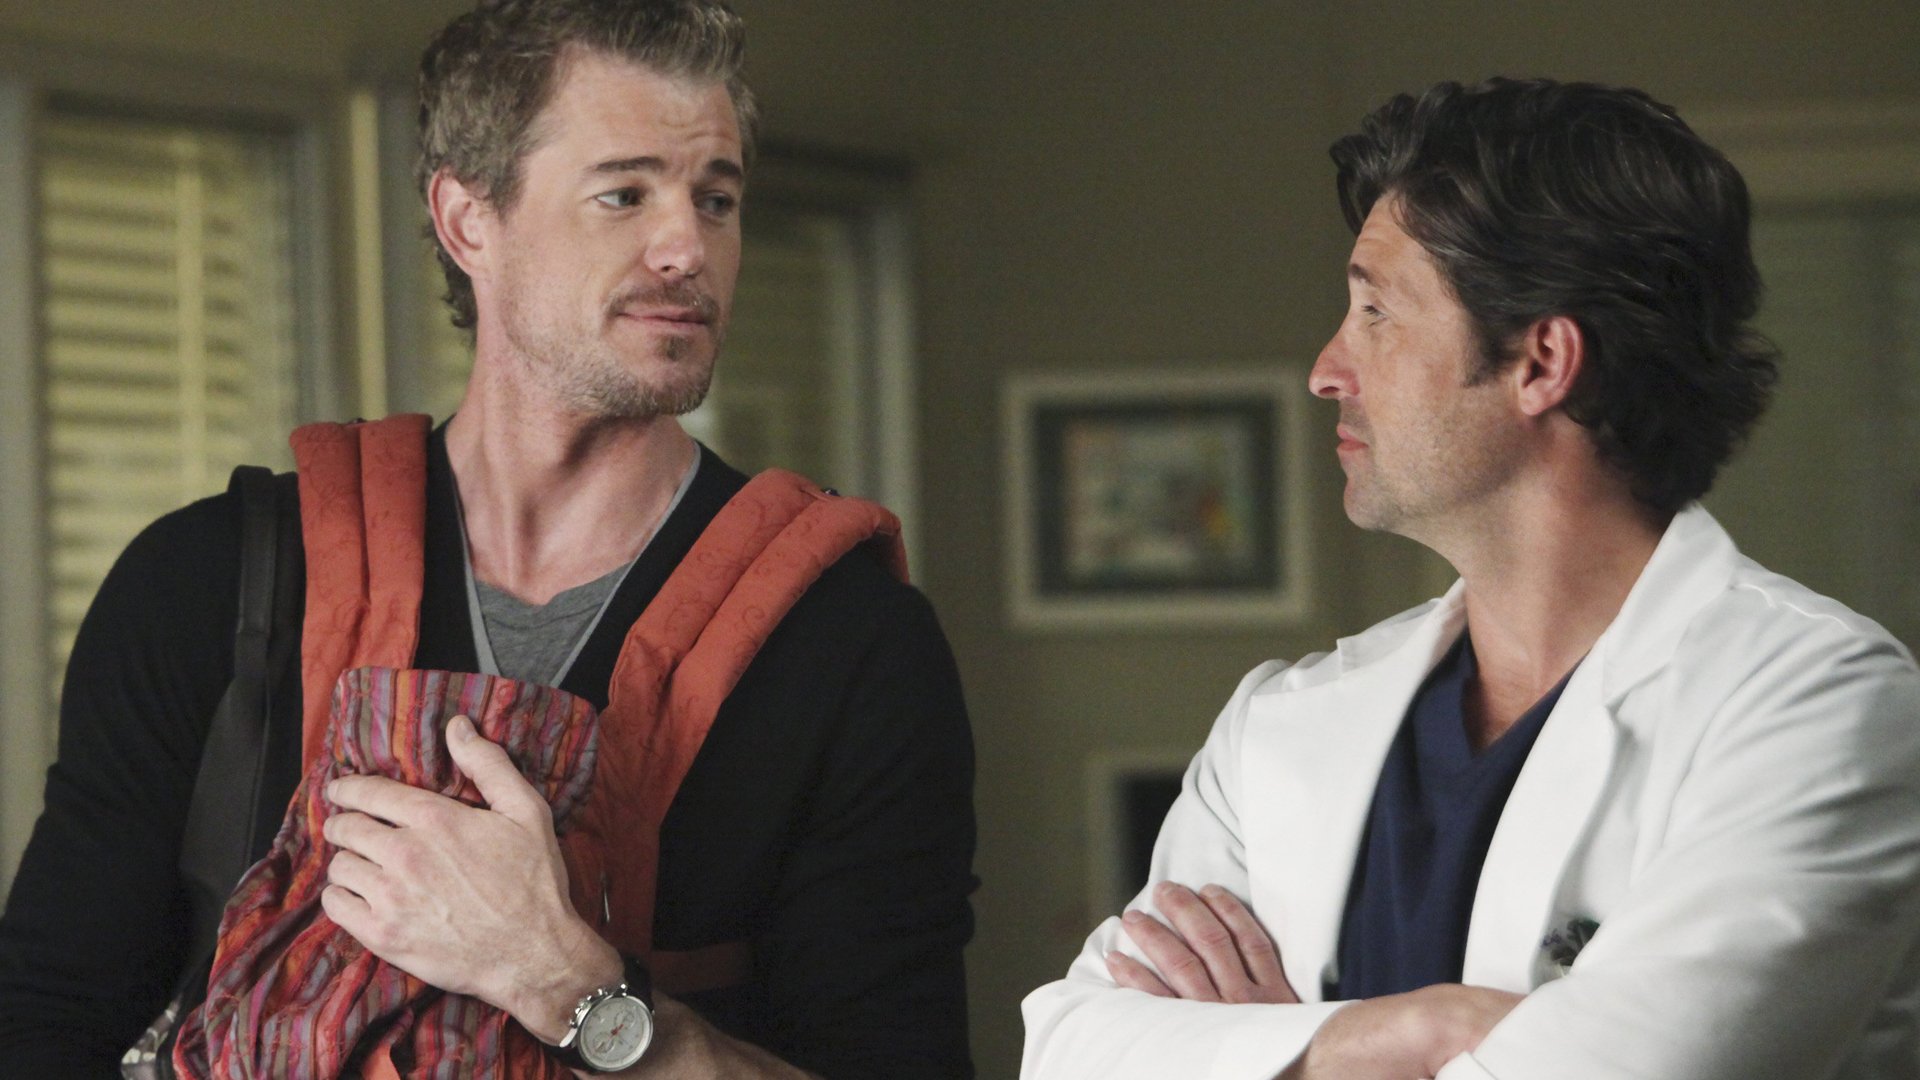 3 ‘Grey’s Anatomy’ Characters Fans Hated at First, But Grew to Love